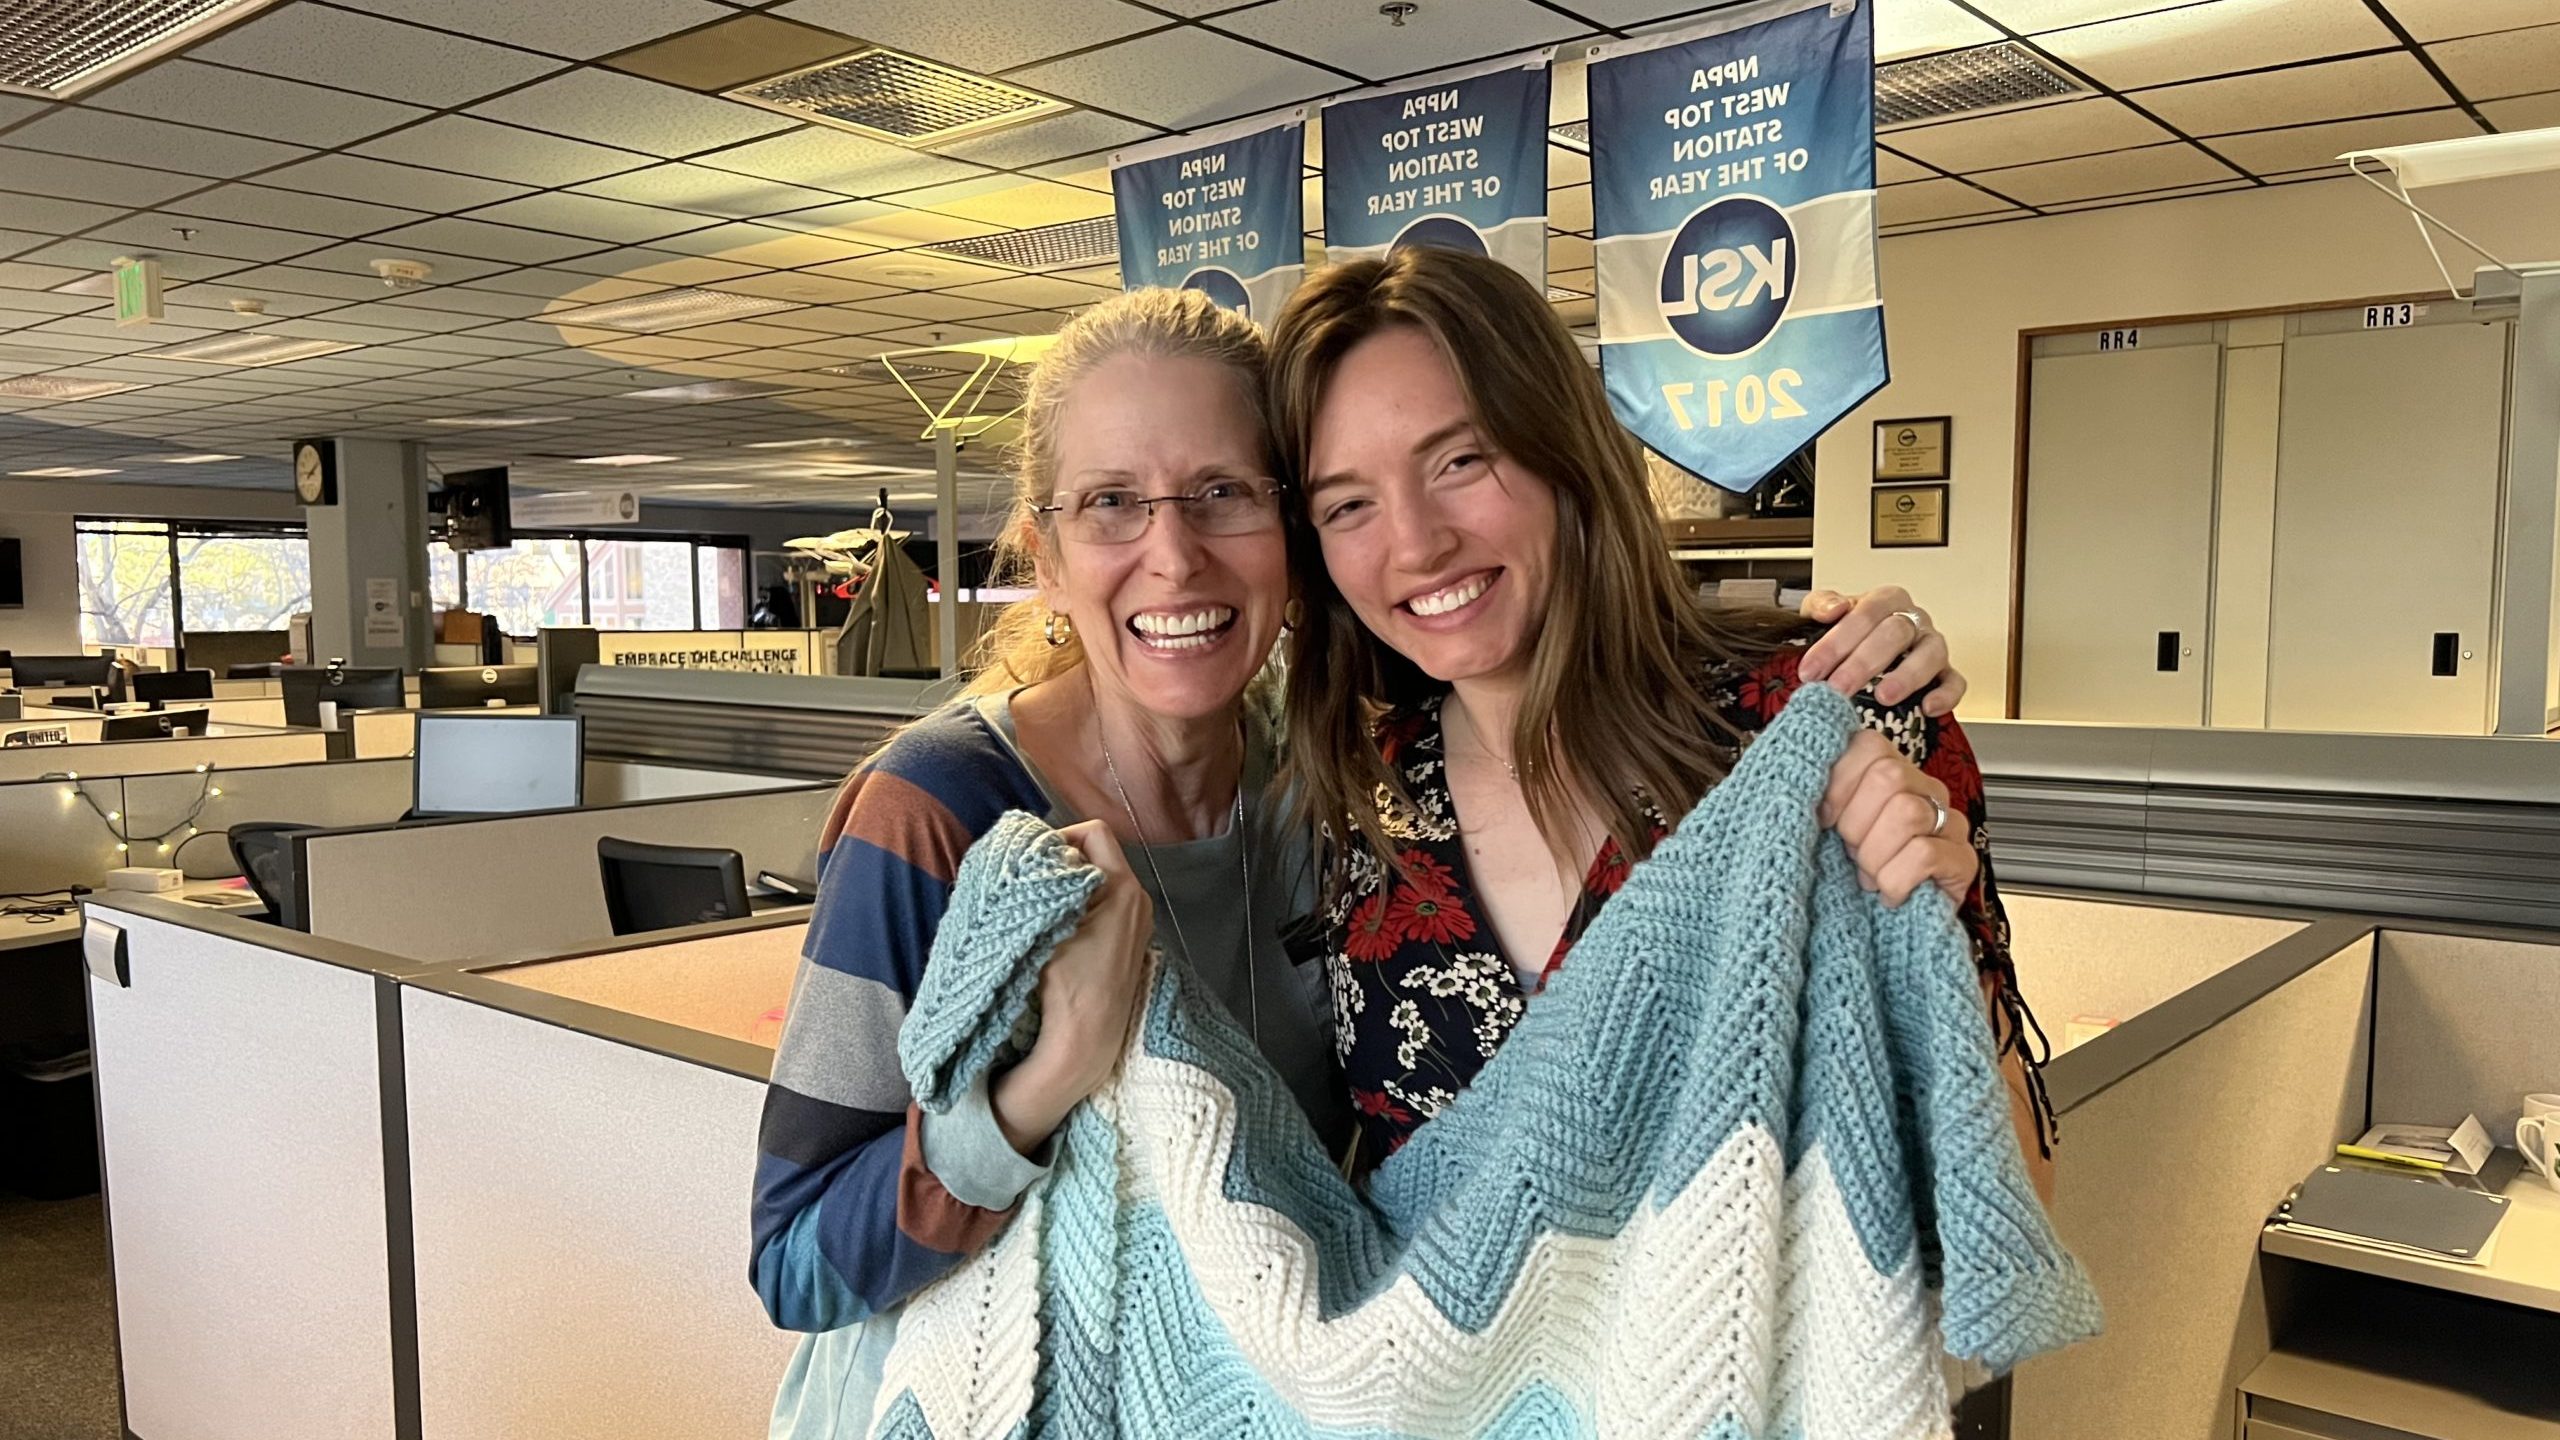 Image of Utah's Morning News host Amanda Dickson and colleague Kate Davis, who says she is grateful...